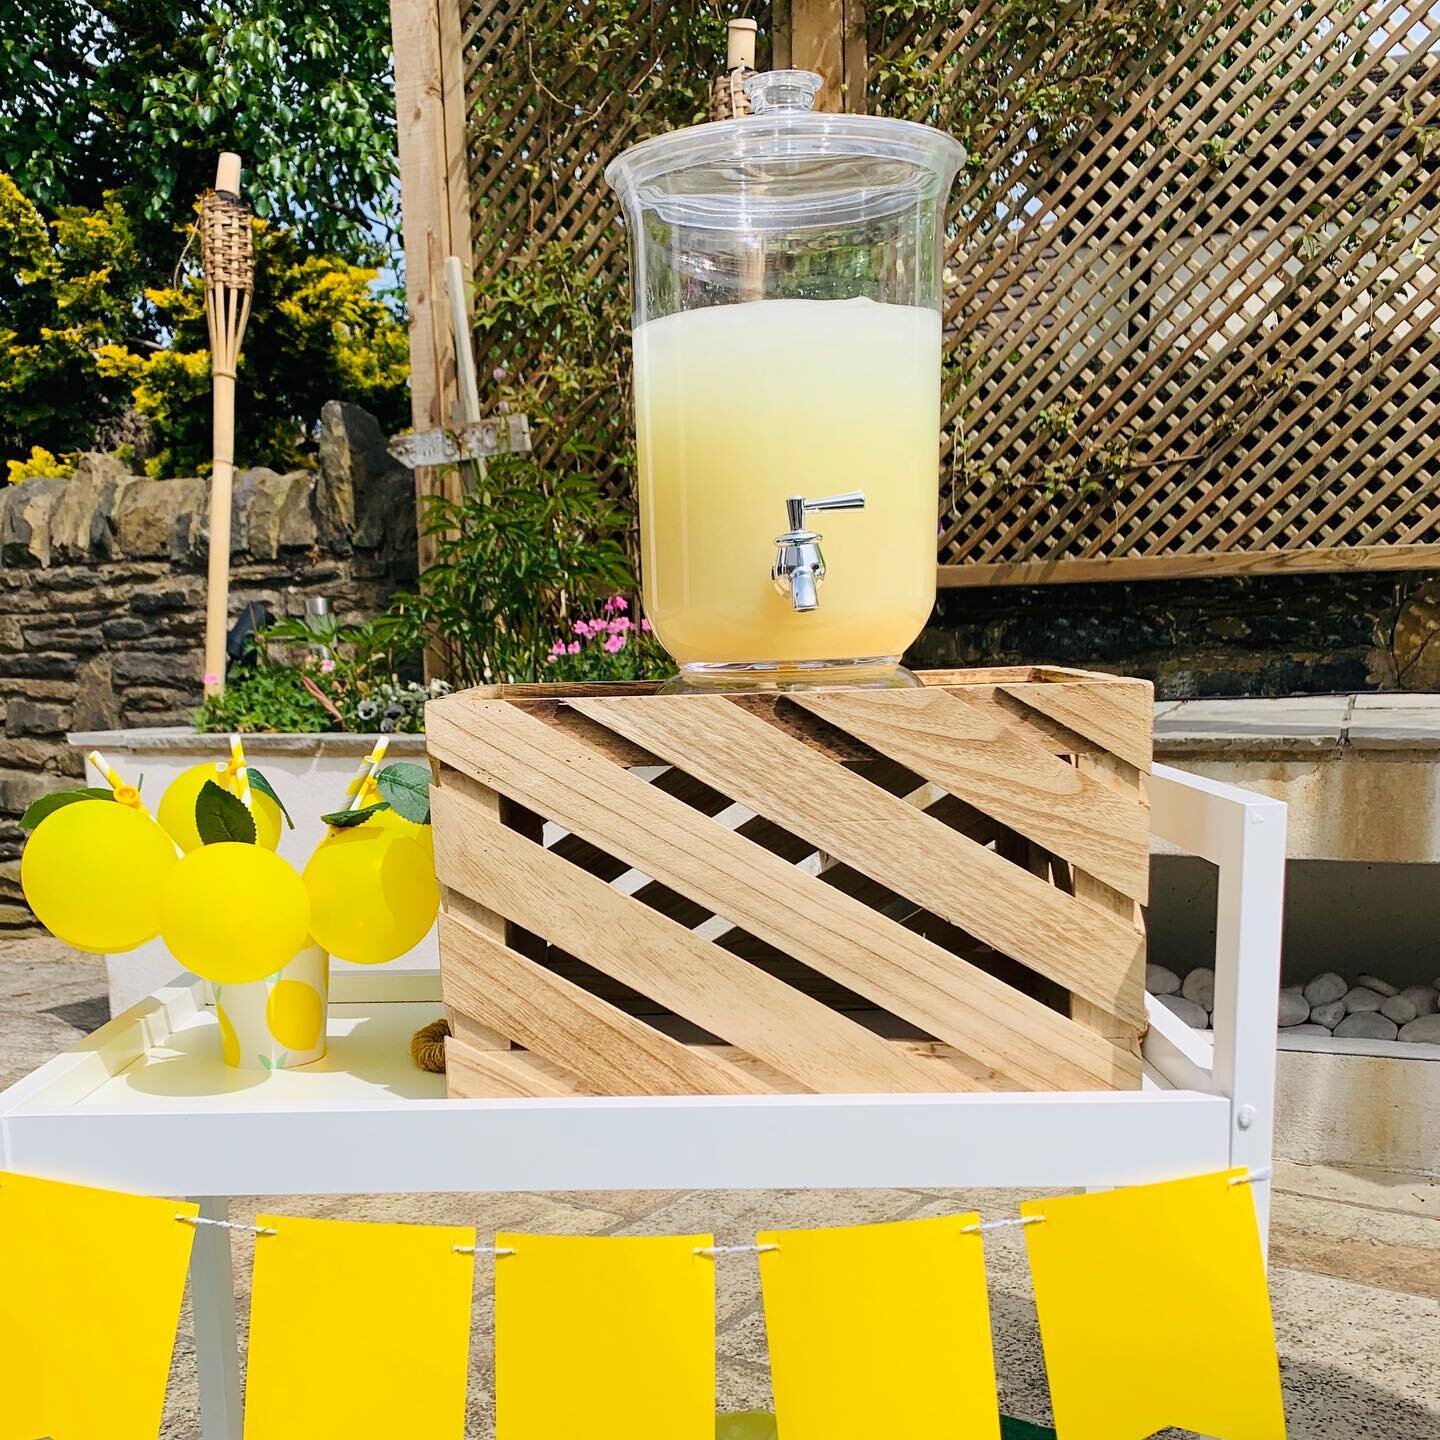 The perfect drinks station to quench your thirst on hot sunny days. Fresh homemade lemonade served with plenty of ice. Why not grab one of our paper straws decorated with mini lemon balloons to add that finishing touch? Can you work out what this par